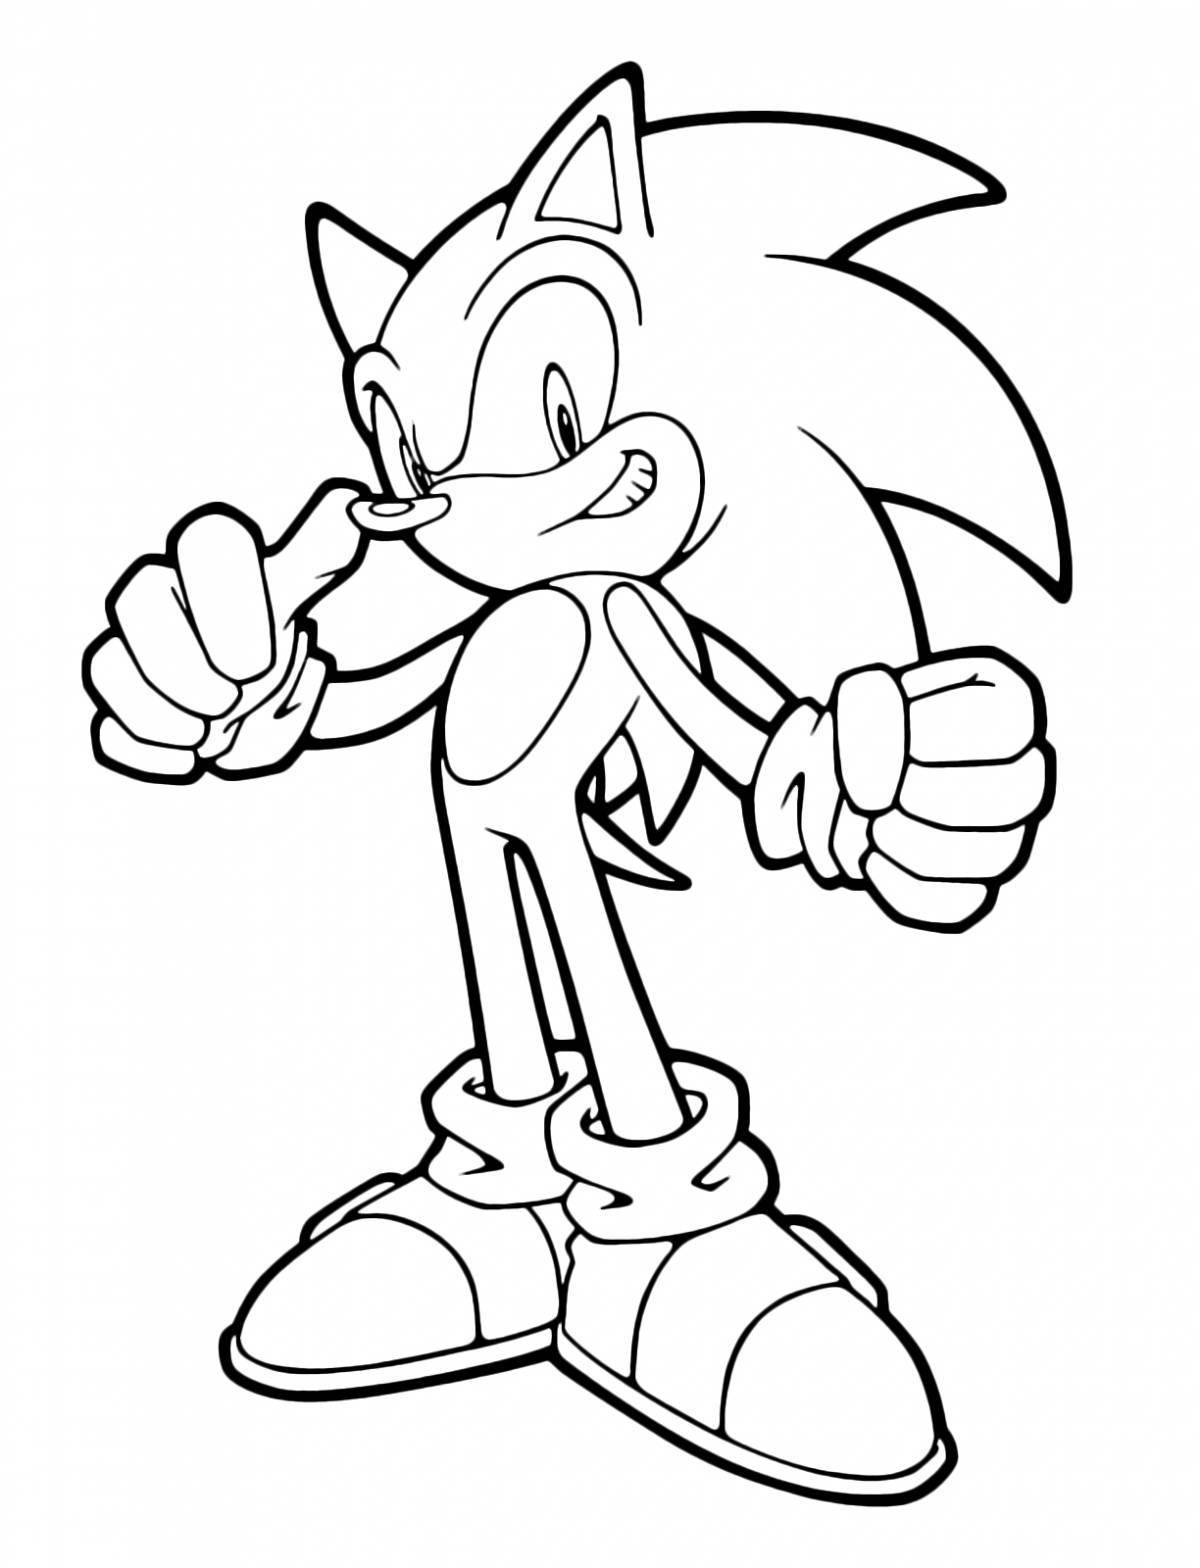 Great sonic coloring book